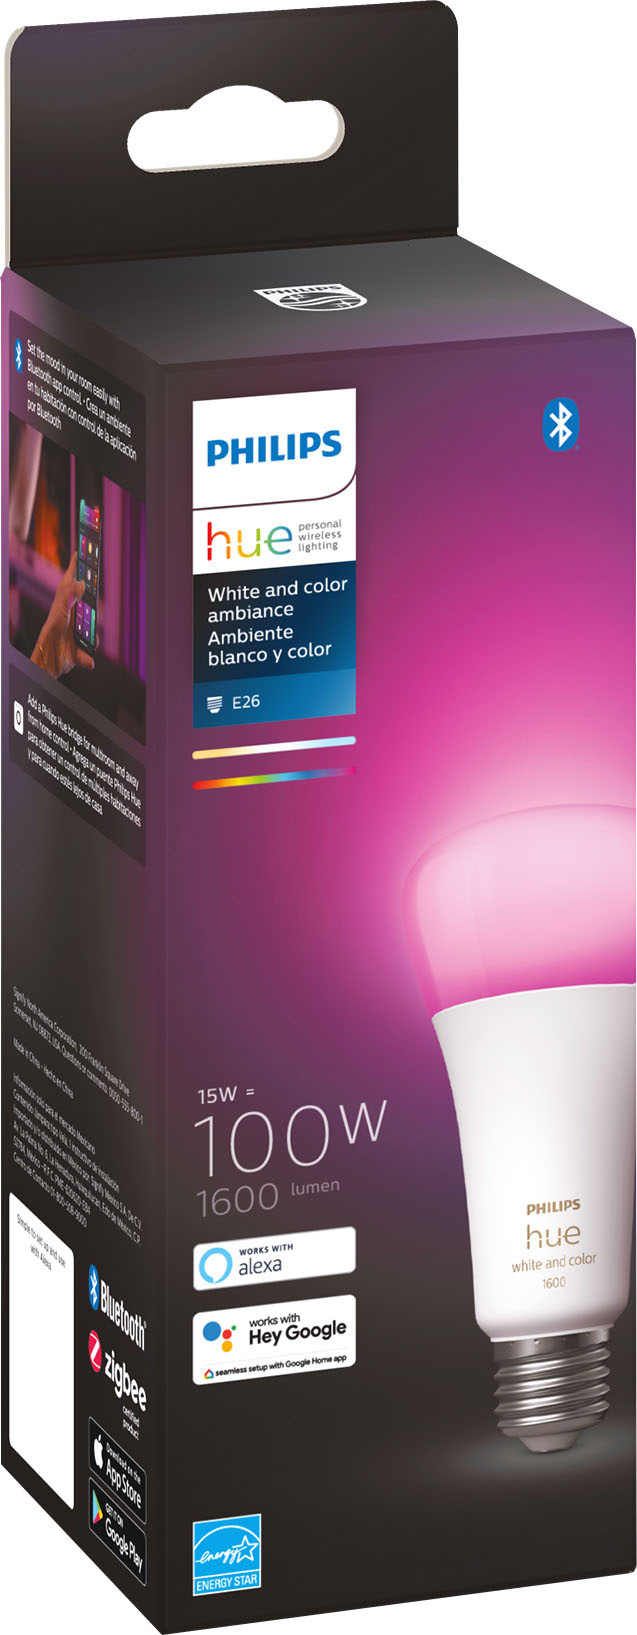 Philips Geek Squad Certified Refurbished Hue 100W A21 LED Smart Bulb White  and Color Ambiance GSRF 562982 - Best Buy